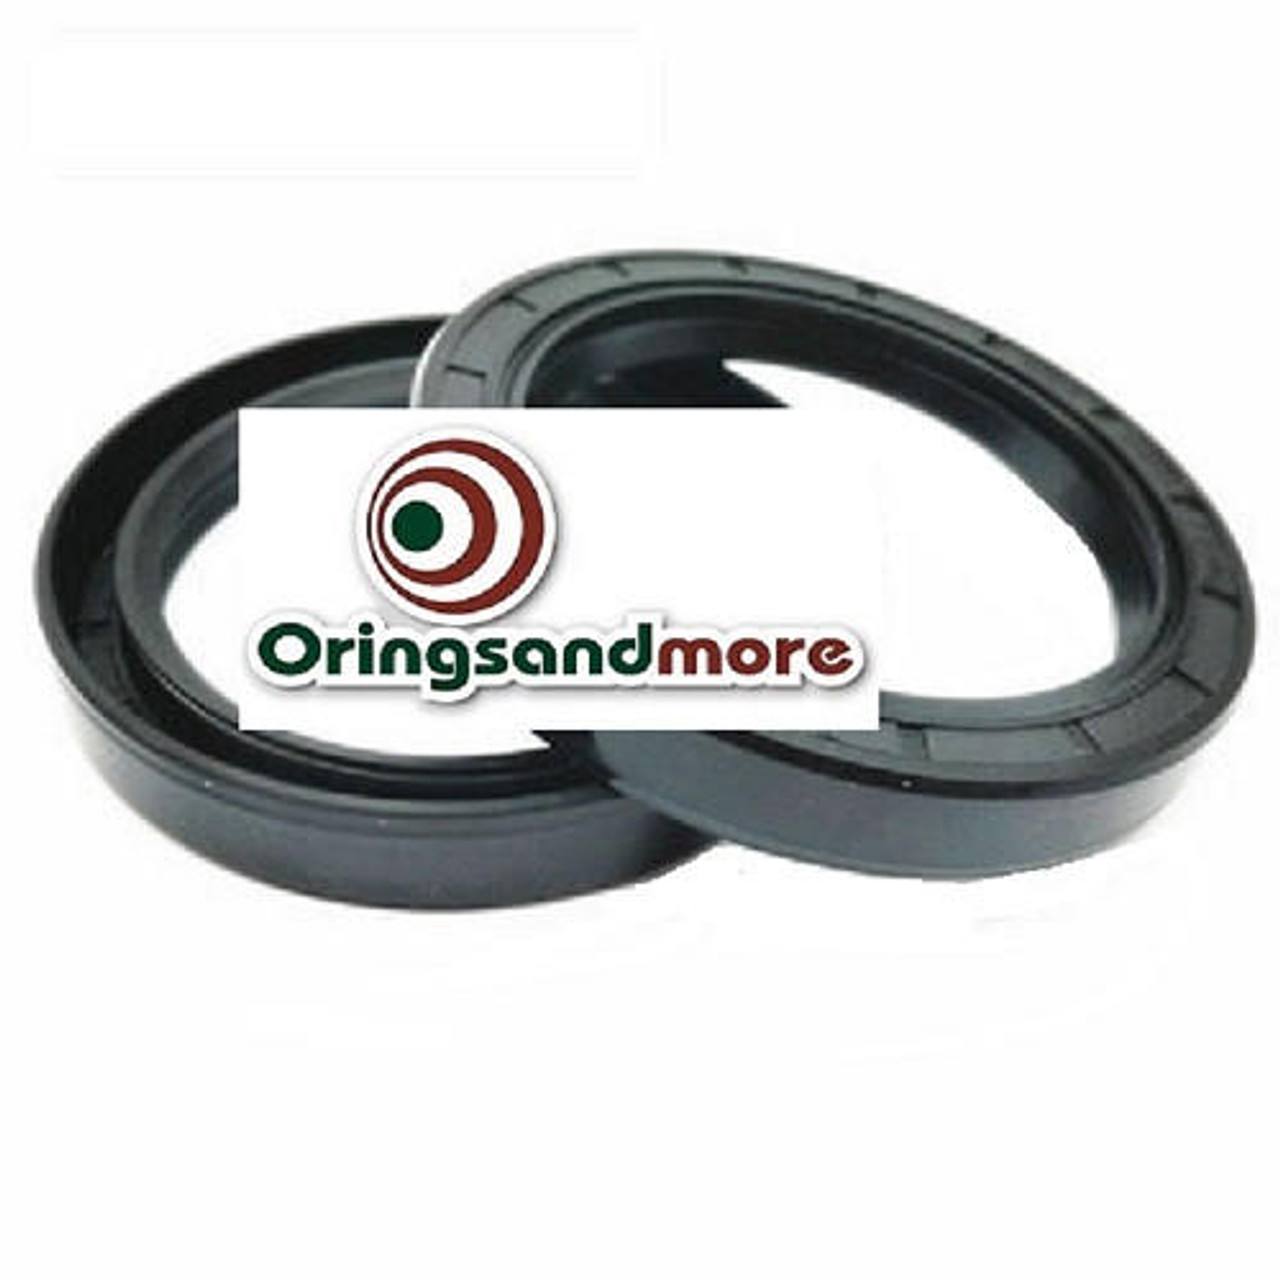 Metric Oil Shaft Seal 22 x 36 x 8mm Double Lip  Price for 1 pc